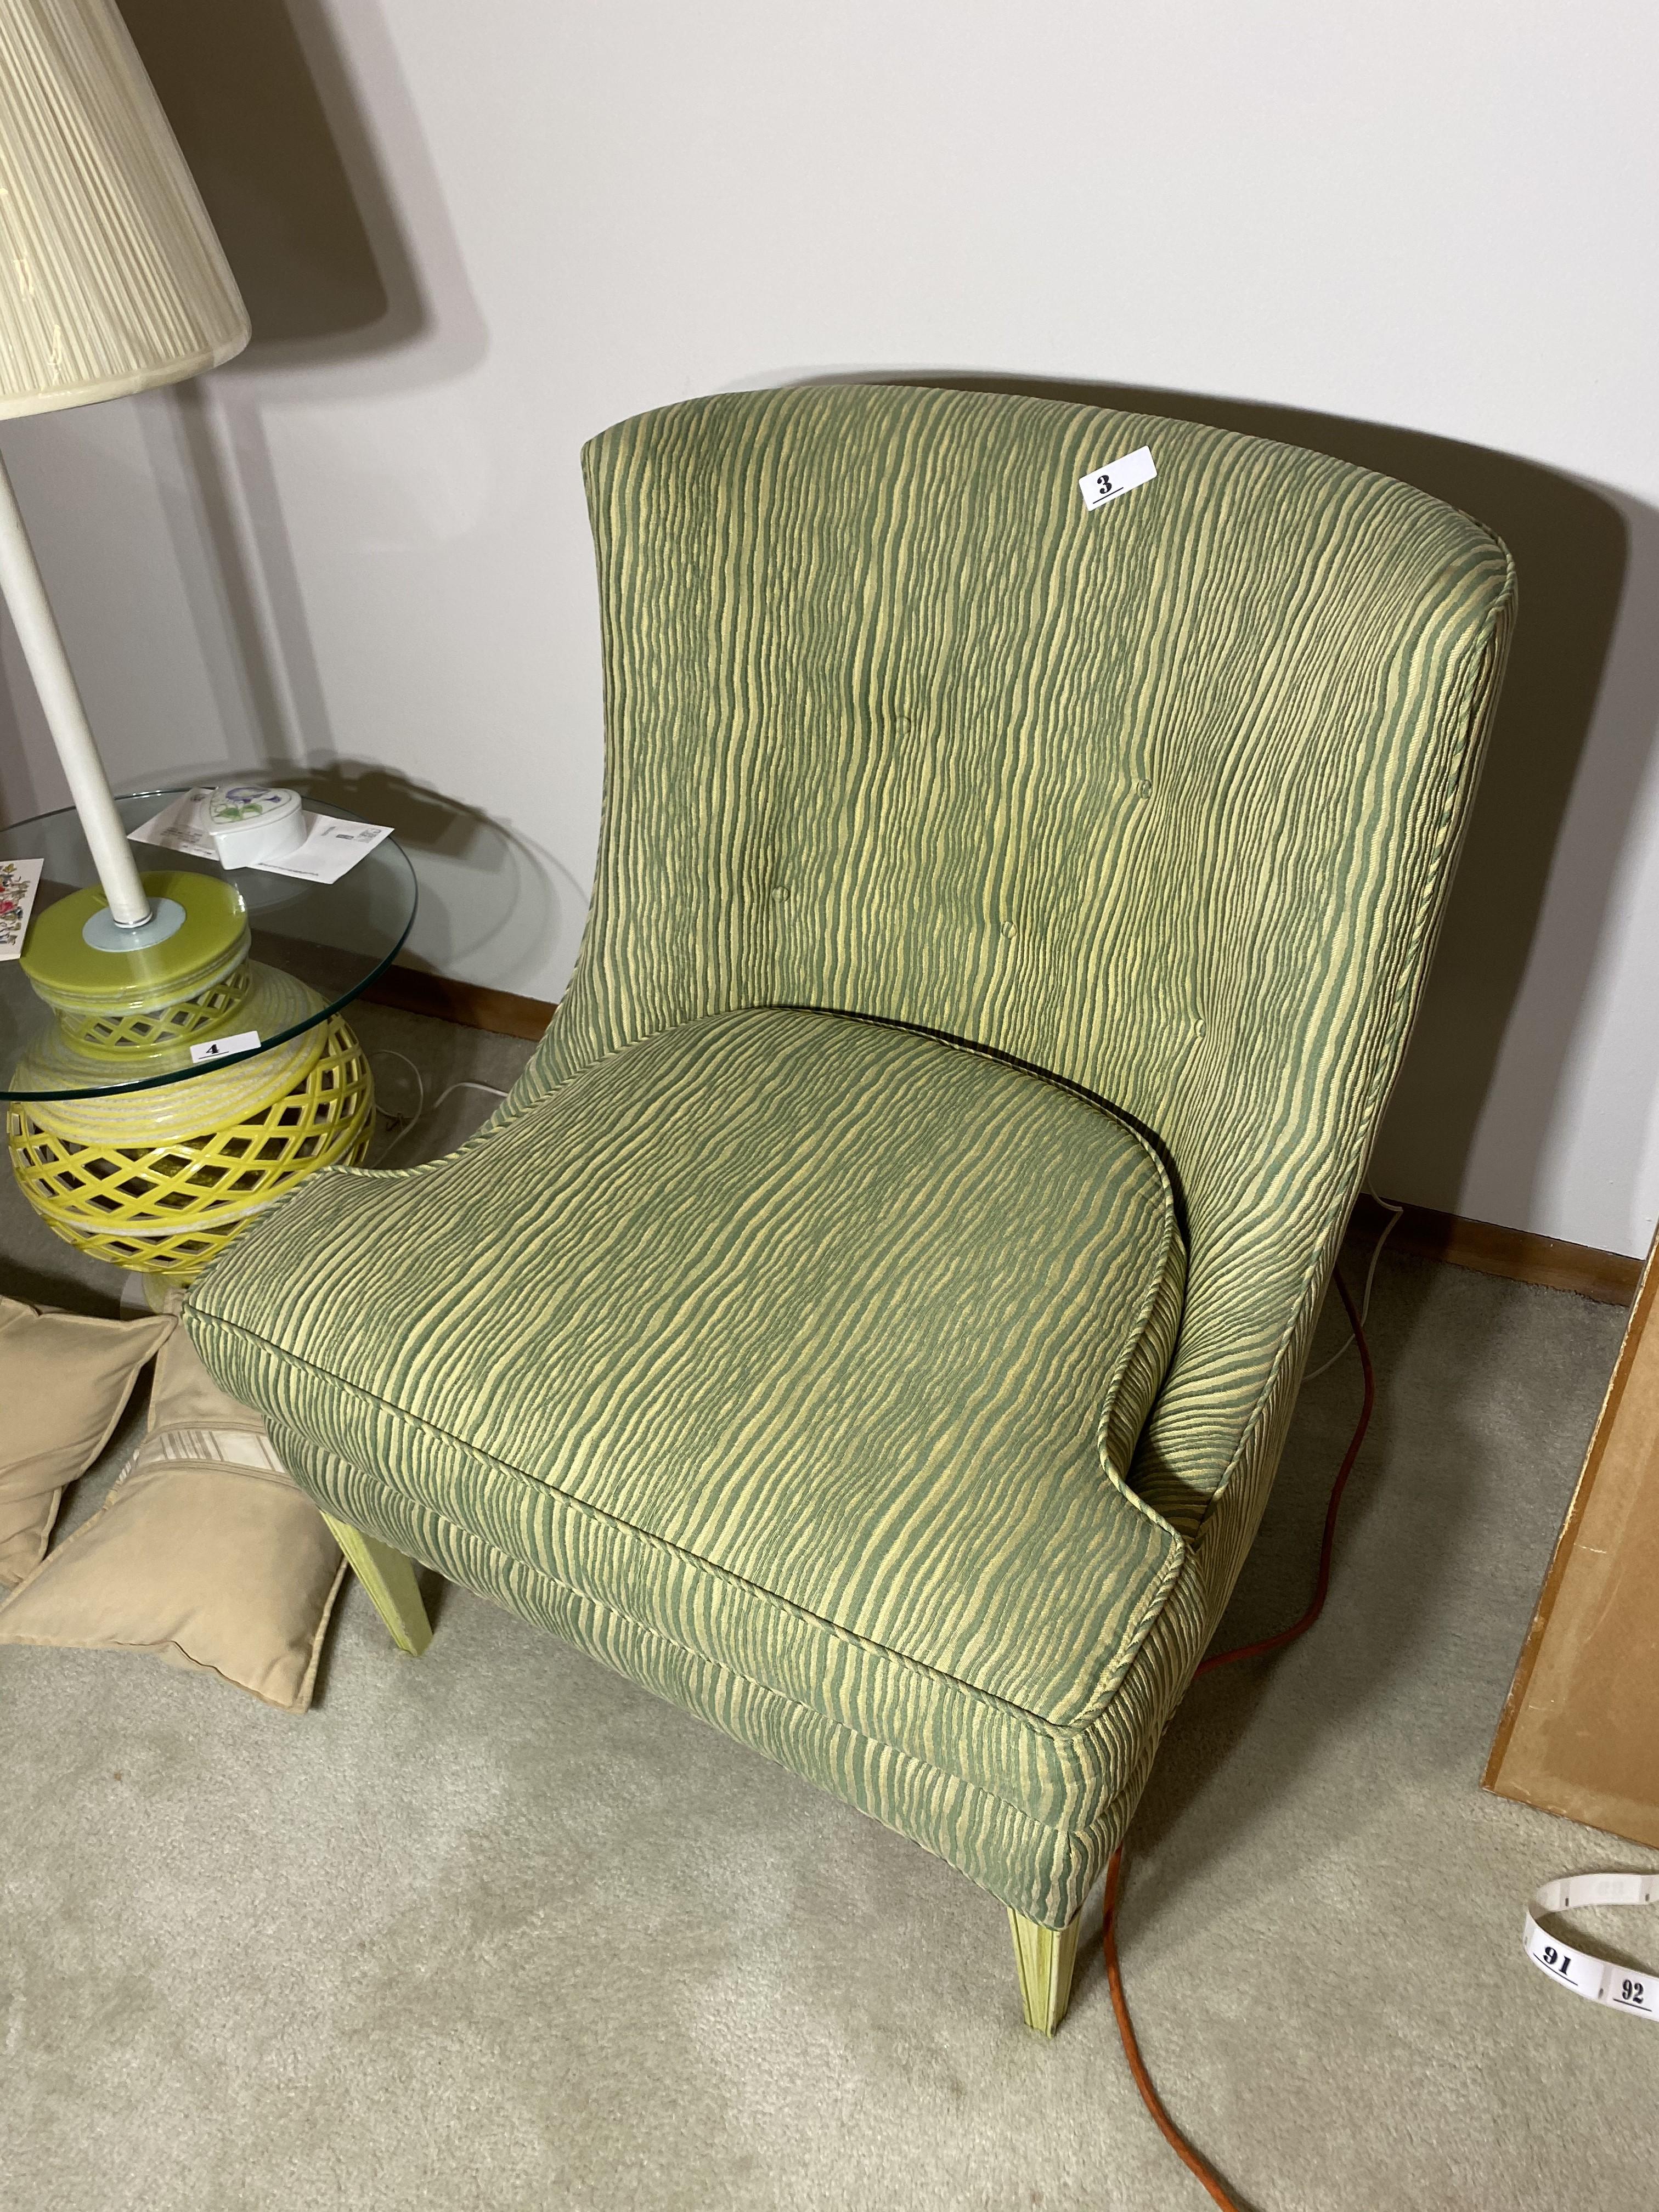 Two Vintage Upholstered chairs